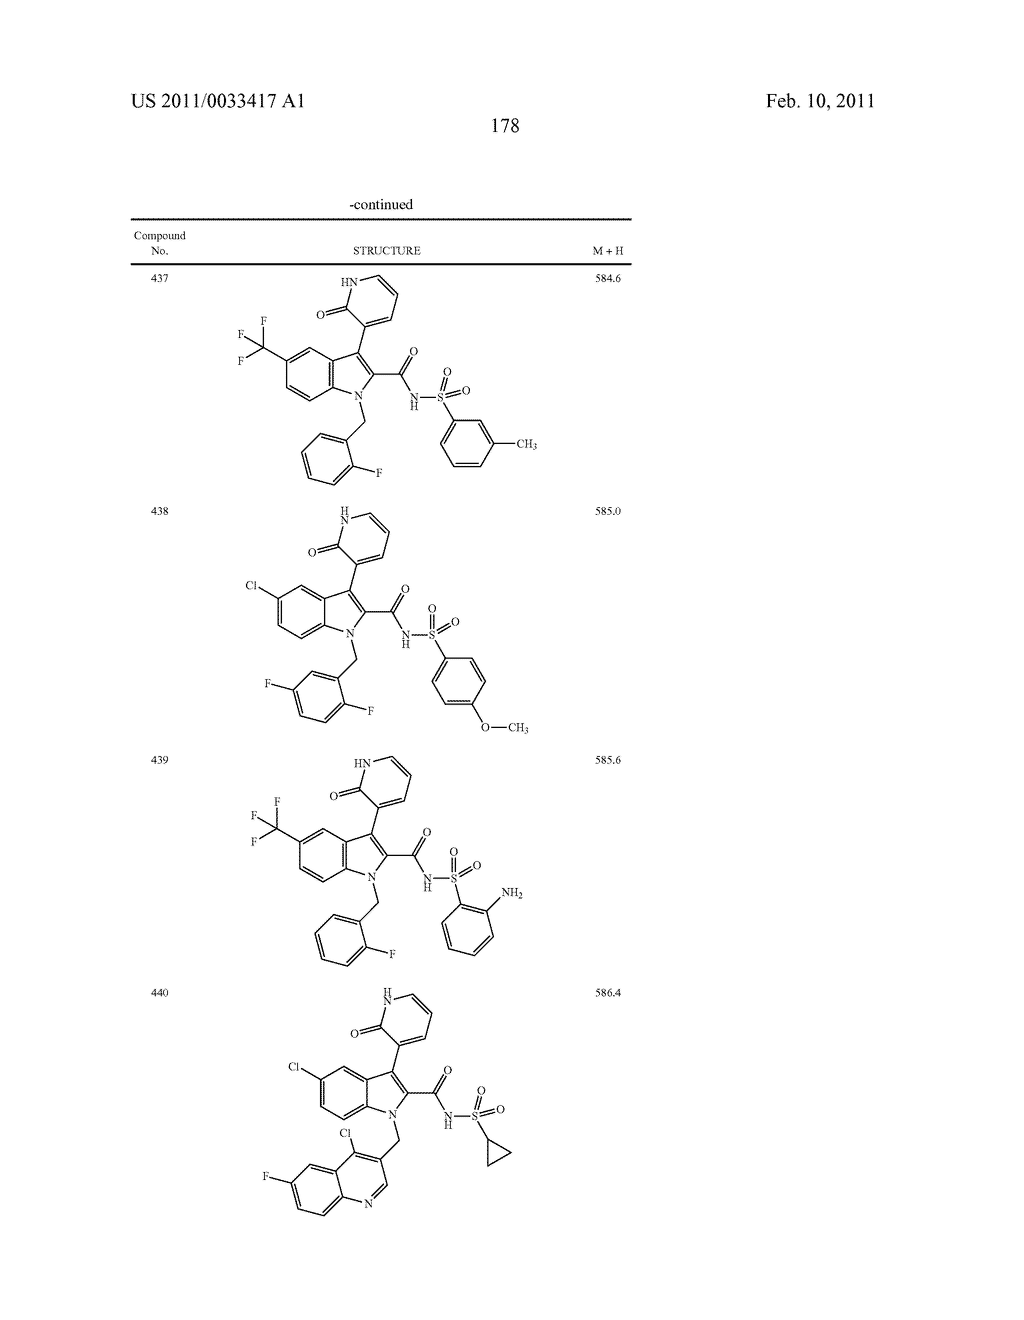 2,3-SUBSTITUTED INDOLE DERIVATIVES FOR TREATING VIRAL INFECTIONS - diagram, schematic, and image 179